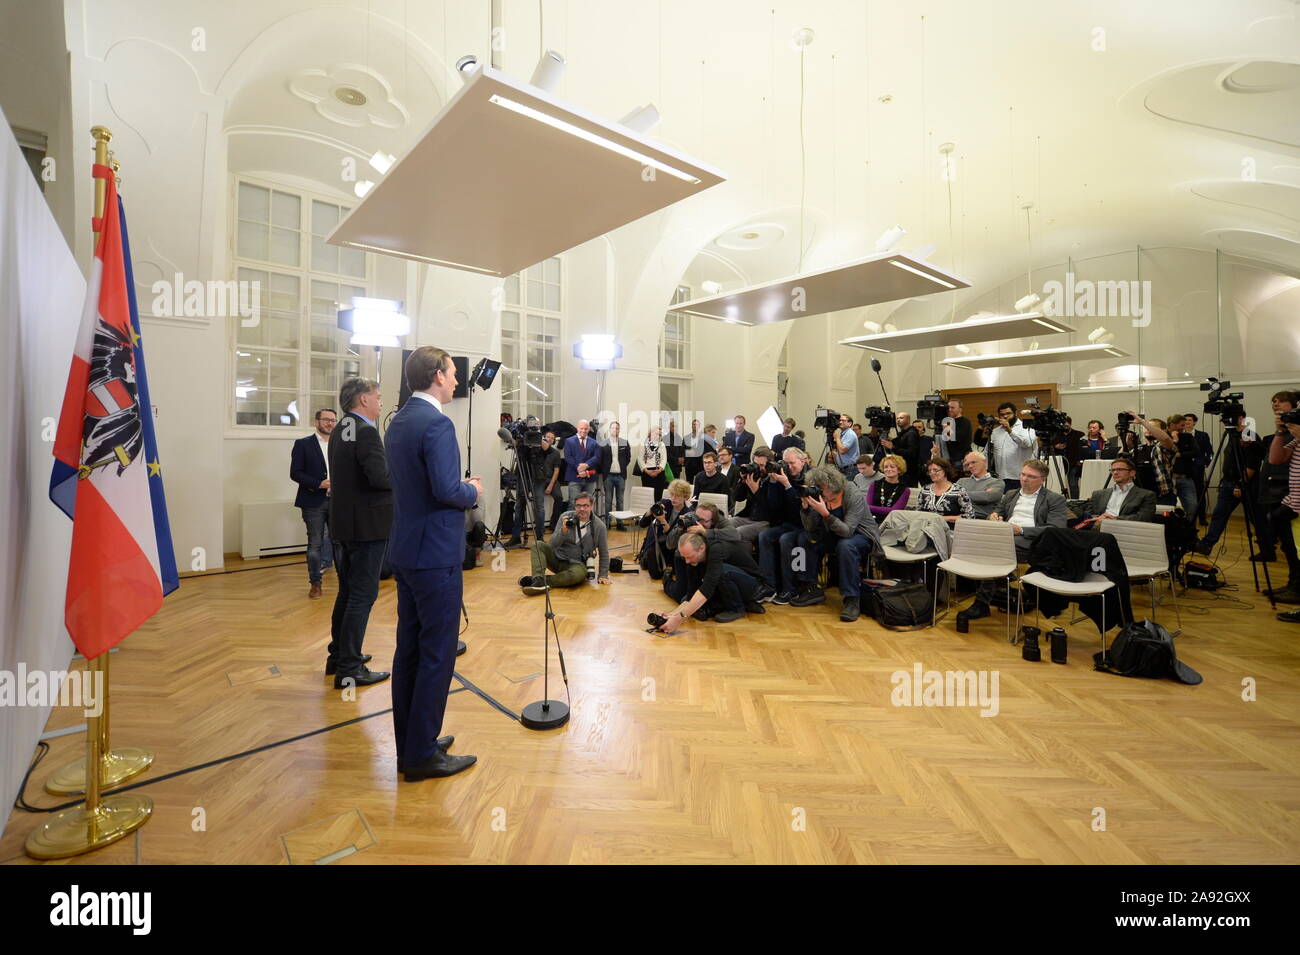 Vienna, Austria. 12th November, 2019. Press Statement by ÖVP (New People's Party Austria) Federal Party Chairman Sebastian Kurz and Green Party Speaker Werner Kogler on the occasion of the start of the coalition negotiations in the Winter Palace Prince Eugen, Himmelpfortgasse 8, on November 12, 2019 in Vienna. Picture shows (from R to L) Sebastian Kurz and national spokesman Werner Kogler. Credit: Franz Perc / Alamy Live News Stock Photo